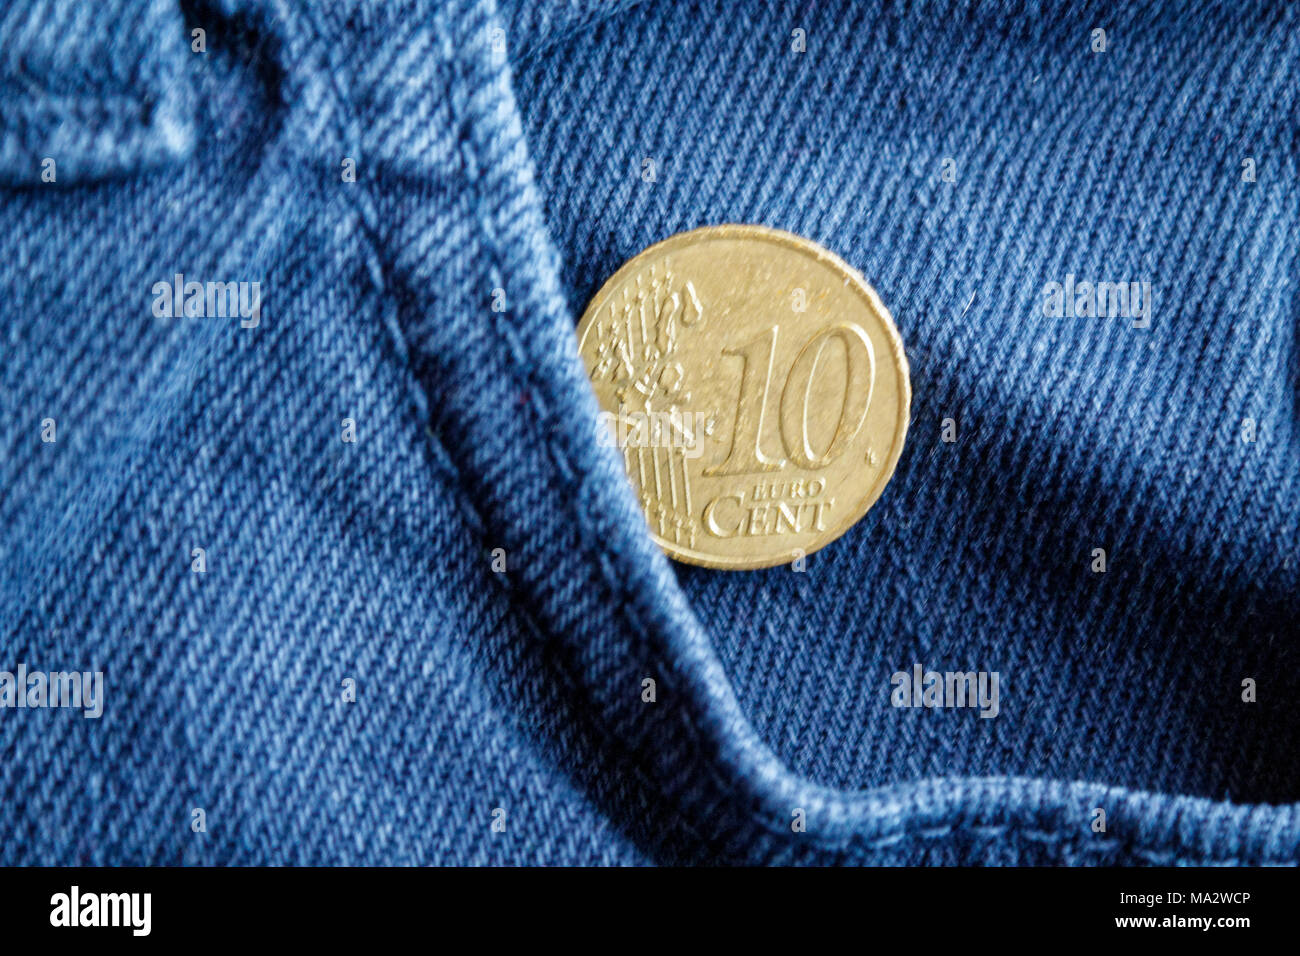 Euro coin with a denomination of ten euro cent in the pocket of worn blue denim jeans Stock Photo